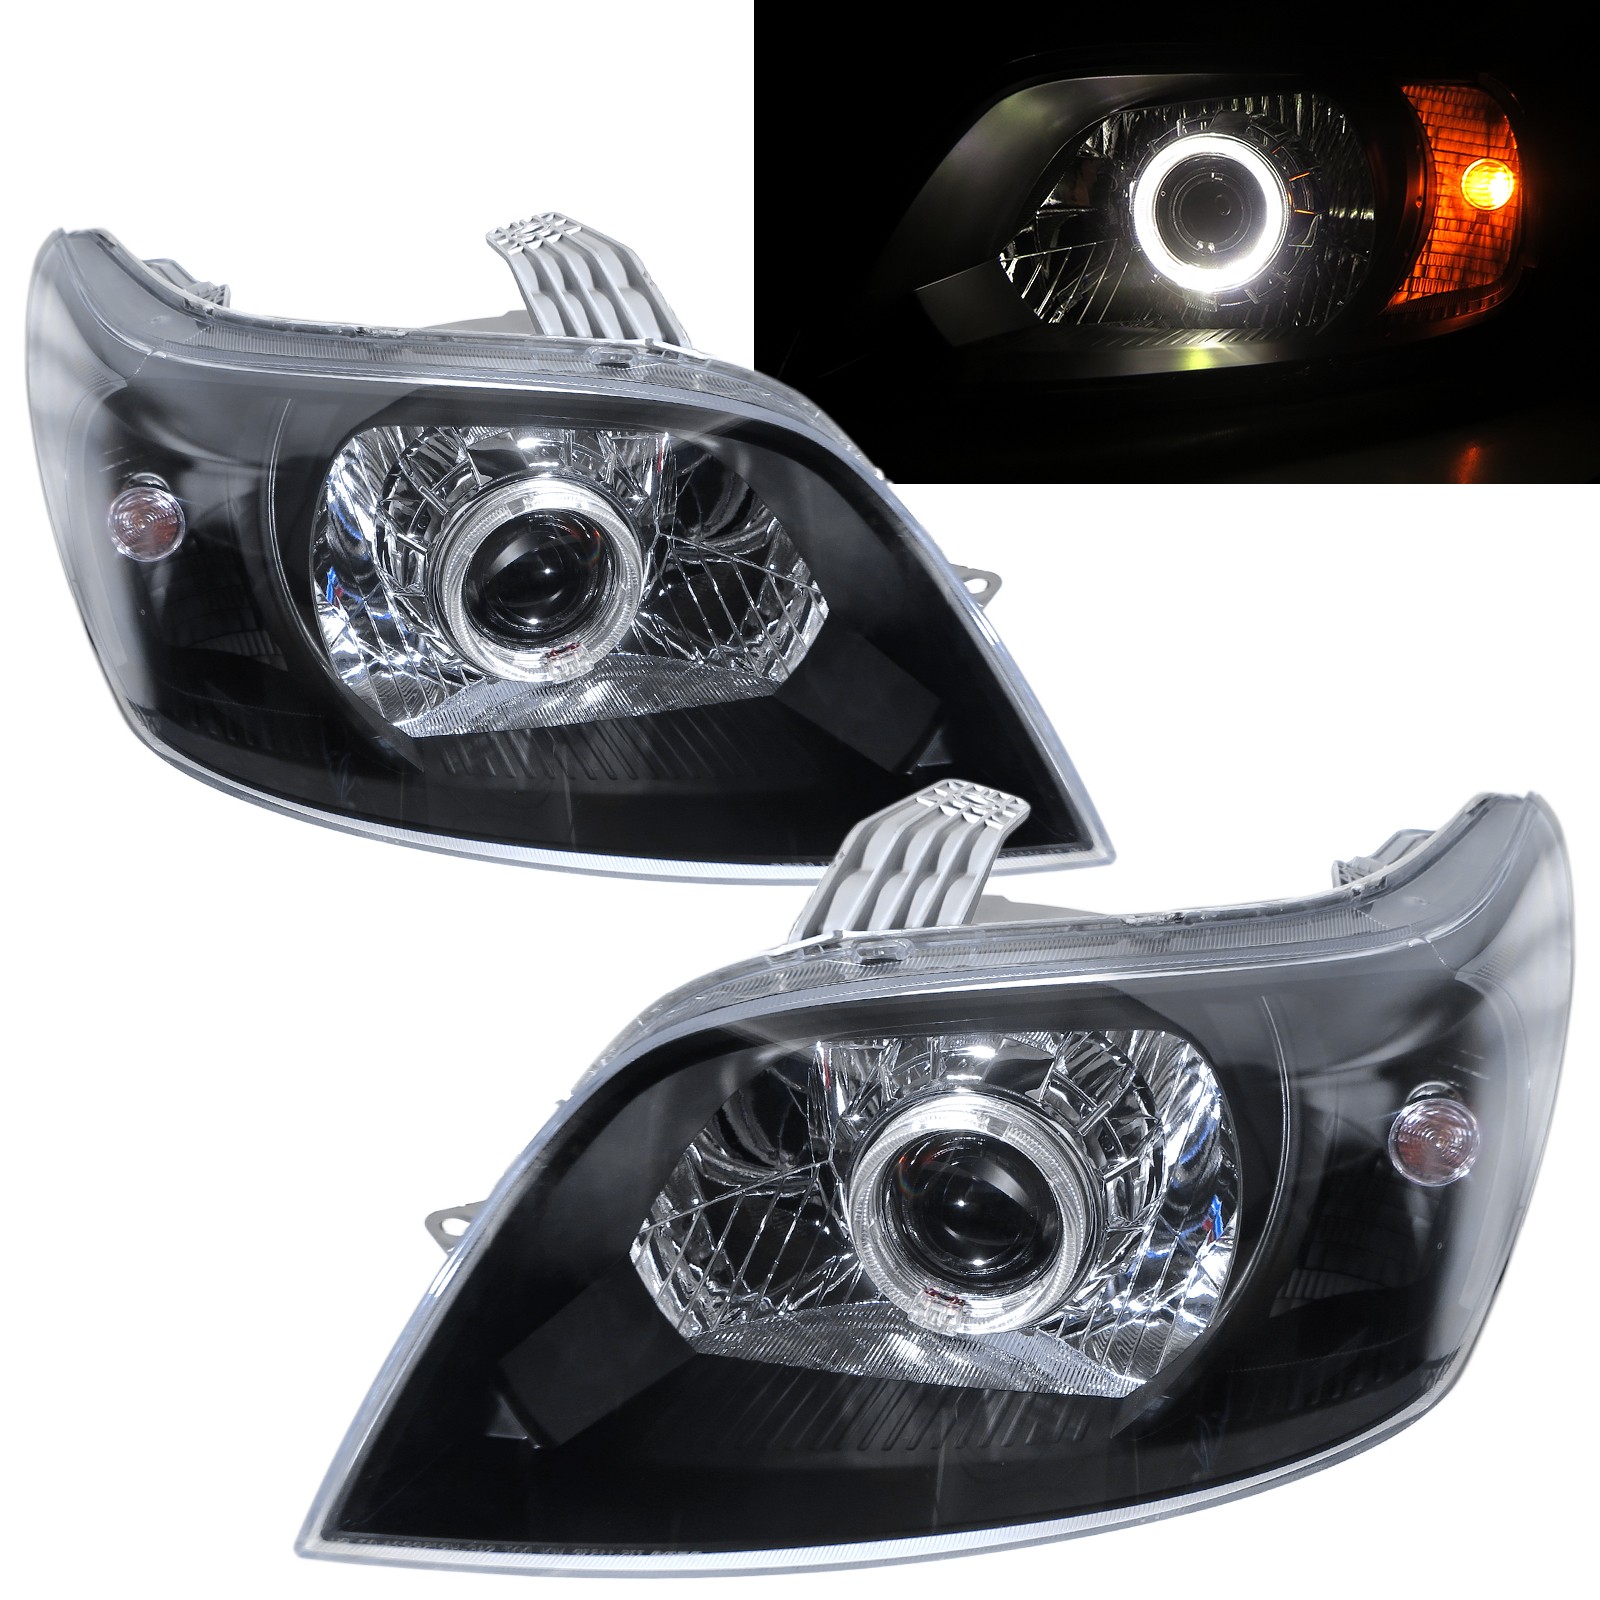 CrazyTheGod Aveo T250 First generation 2009-2011 FACELIFT Hatchback 3D/5D Guide LED Angle-Eye Projector Headlight Headlamp Black US for CHEVROLET CHEVY RHD